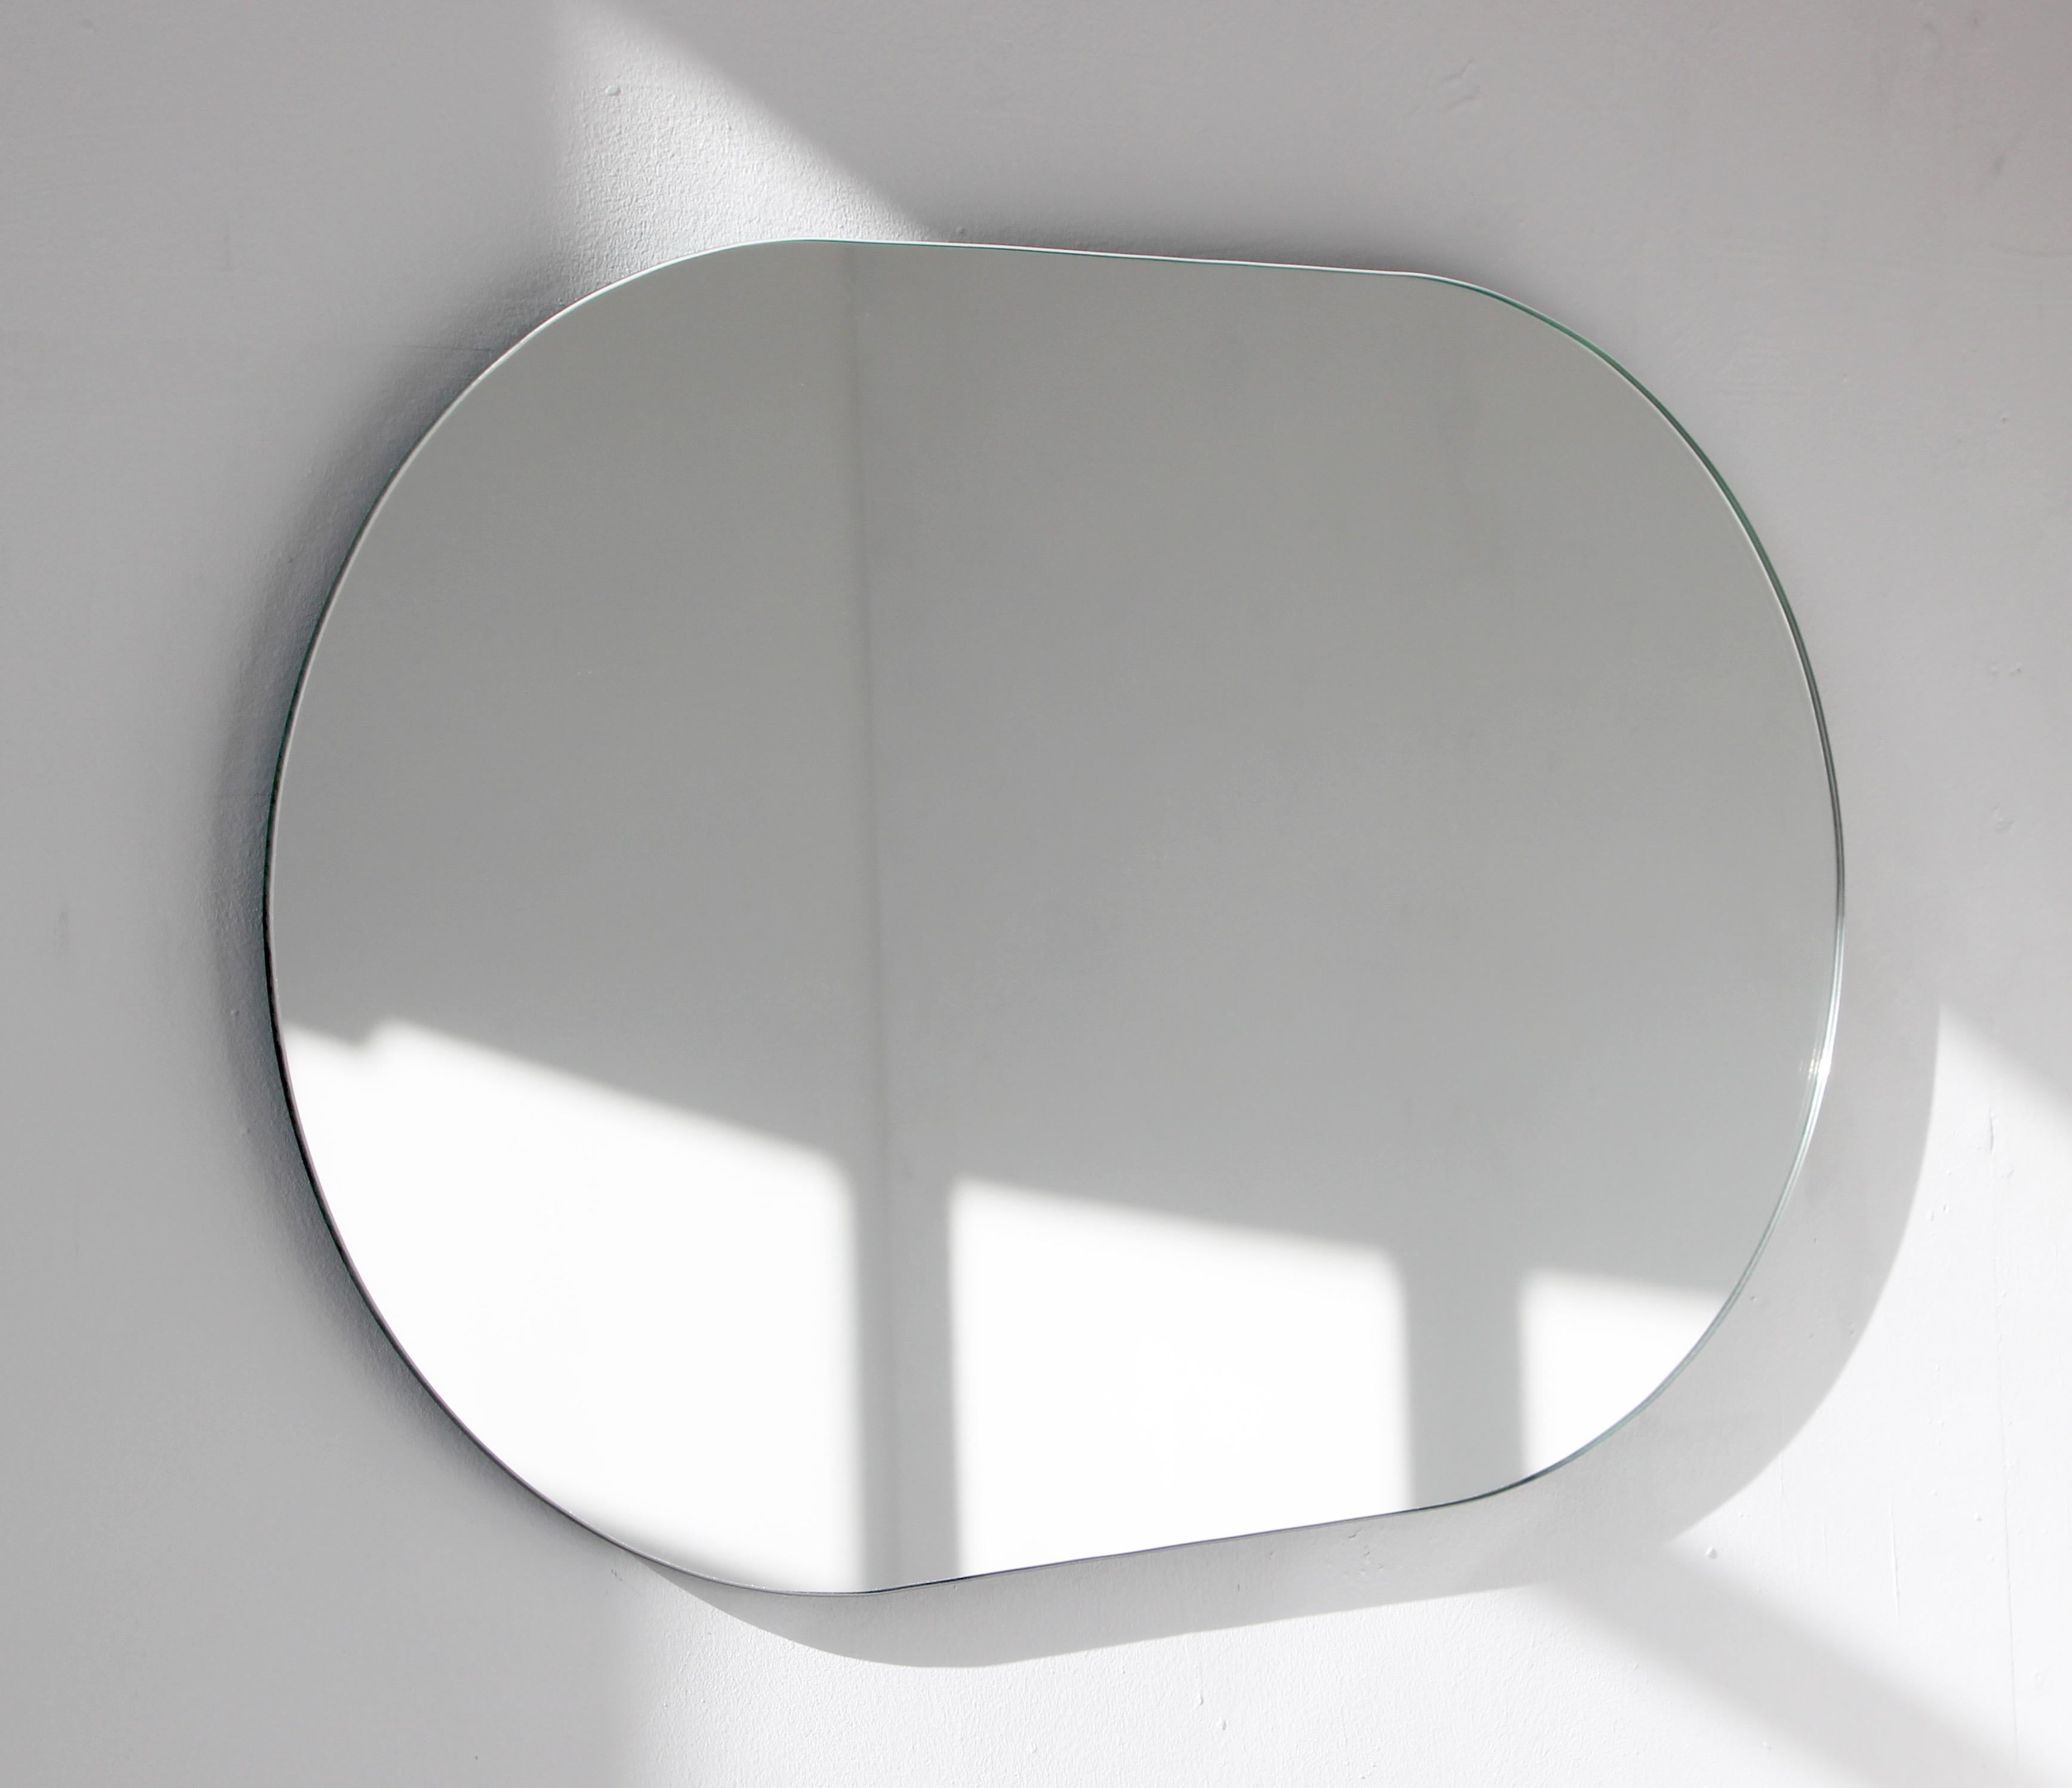 Minimalist capsule shaped frameless mirror. Quality design that ensures the mirror sits perfectly parallel to the wall. Designed and made in London, UK.

Fitted with professional plates not visible once installed for an easy and safe installation.